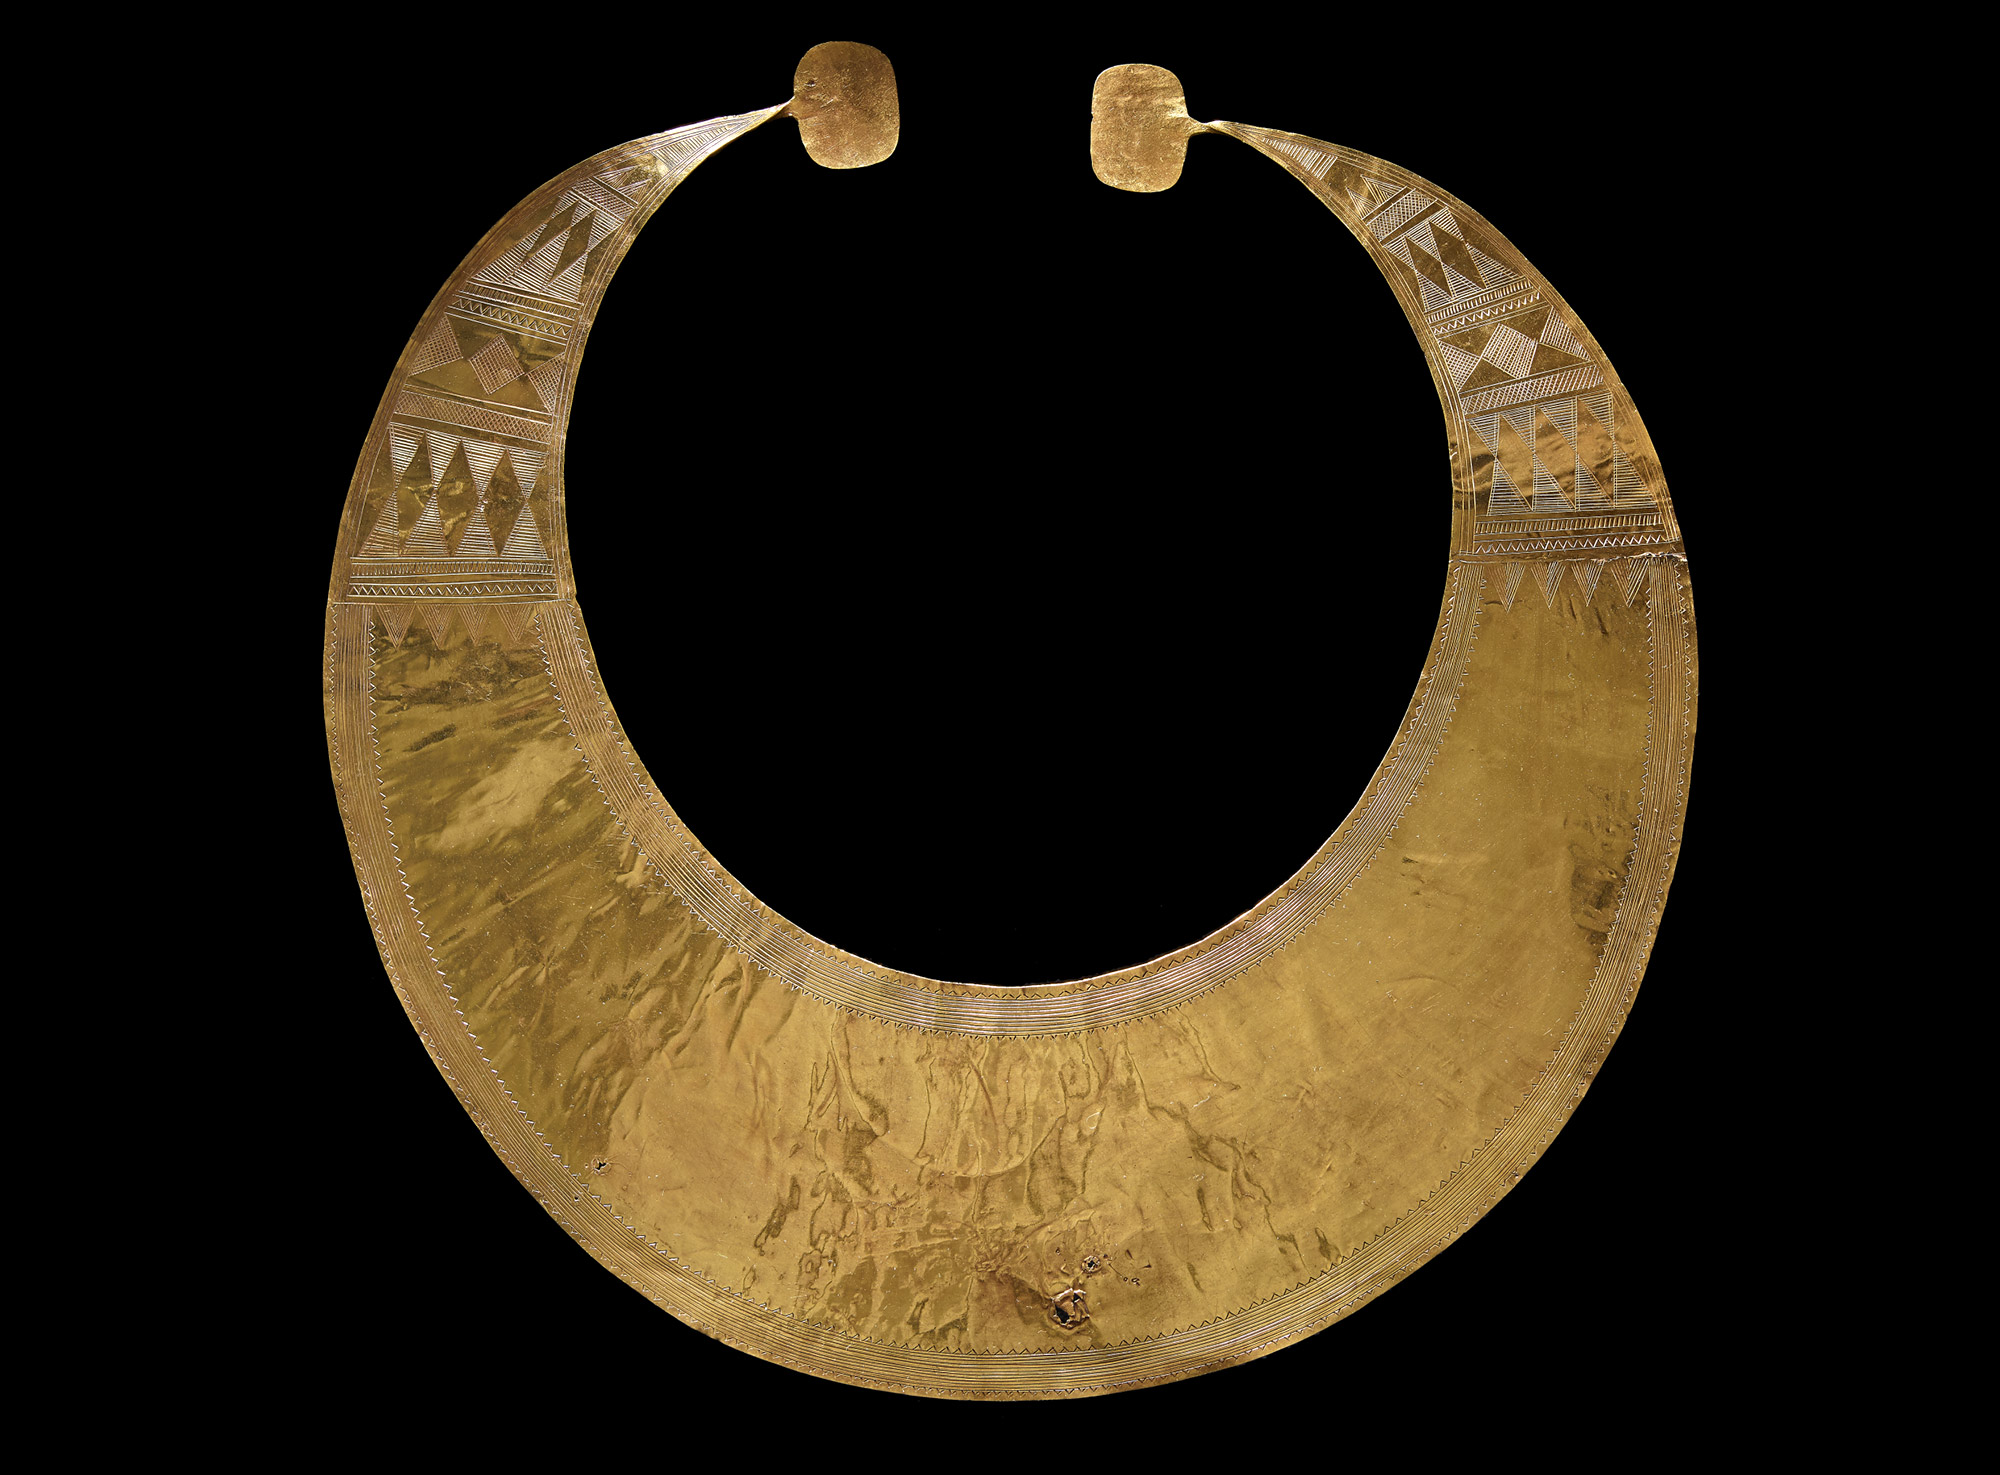 Lunula were worn around the neck, presumably by high status or special people. Their shape and decoration resembles amber and jet necklaces from this time 